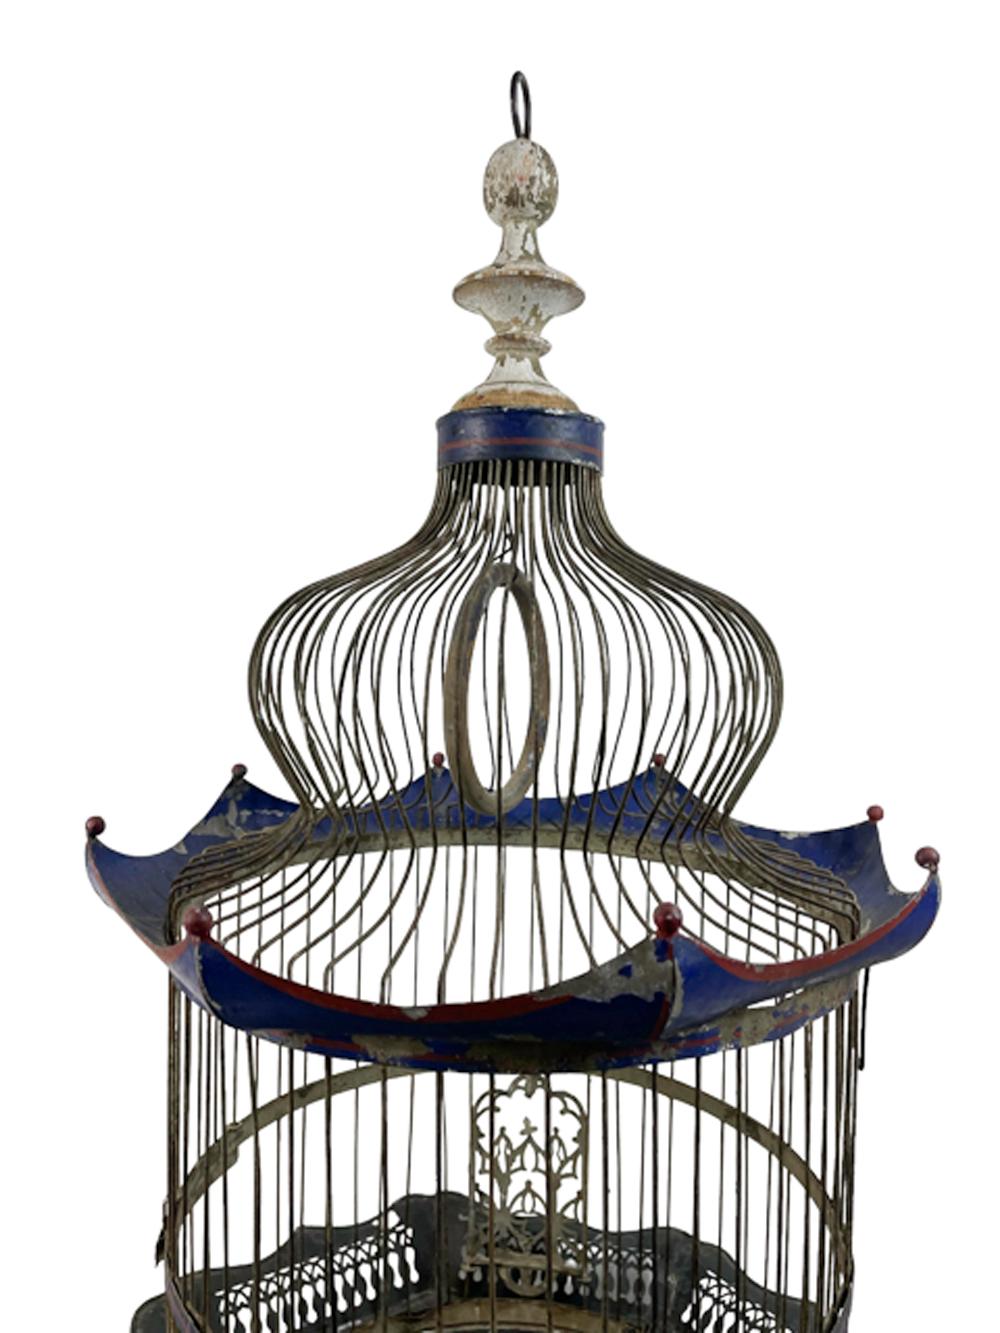 19th Century 19thc Painted Sheet Metal and Wire Birdcage John Maxheimer, New York, NY, 1885 For Sale